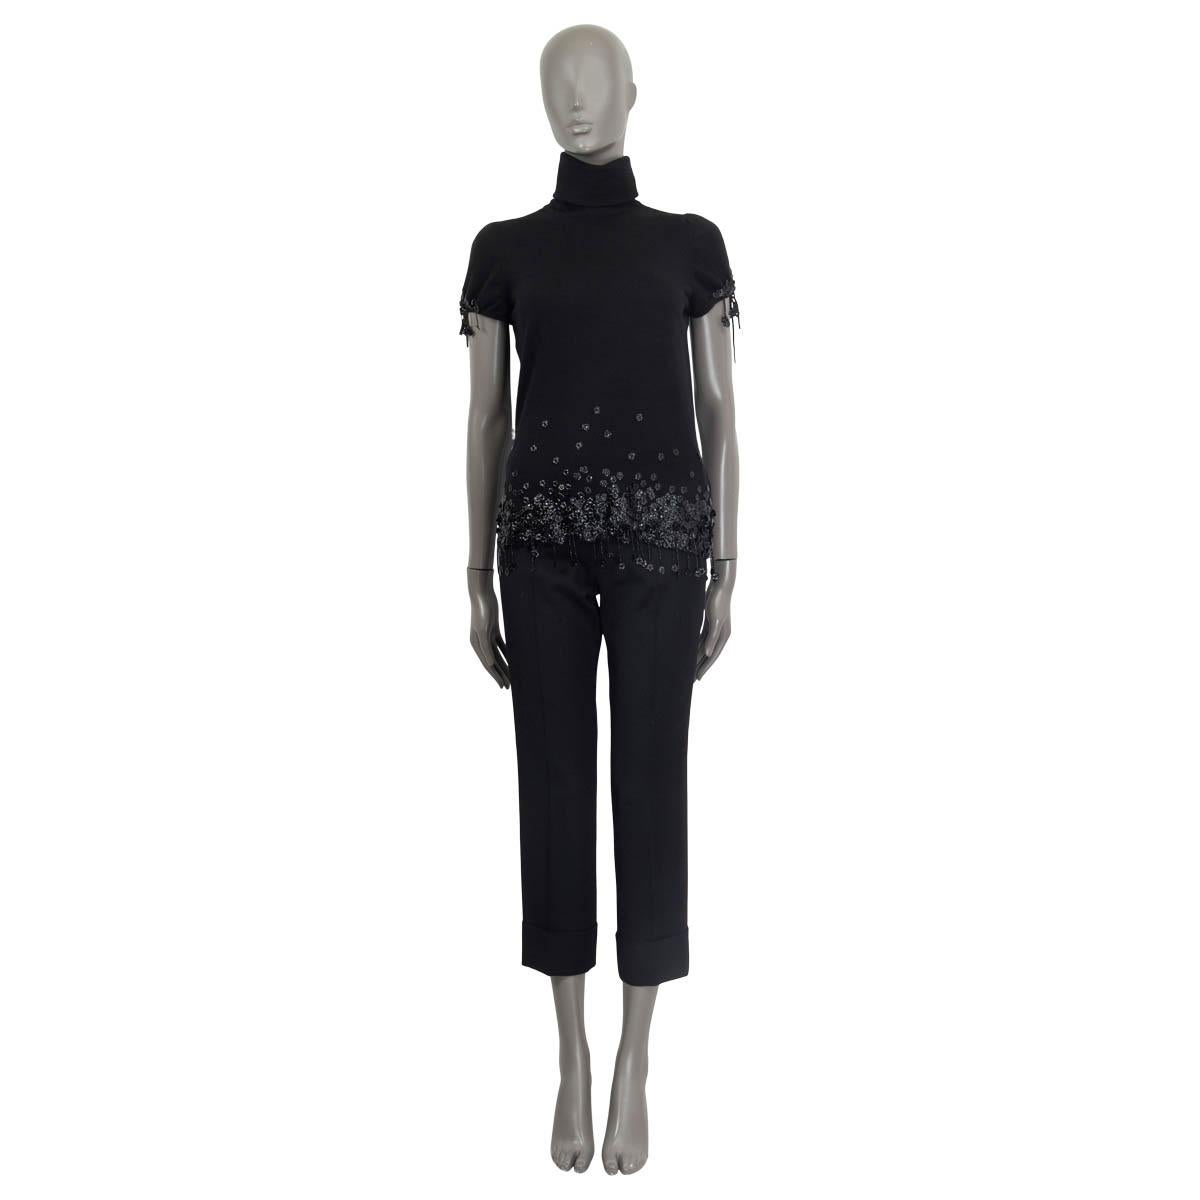 100% authentic Chanel short sleeve top in black cashmere (100%). Embellished with pearl fringes and black flowers. Features a turtleneck and opens with eight 'CC' buttons on the back. Unlined. Has been worn and is in excellent